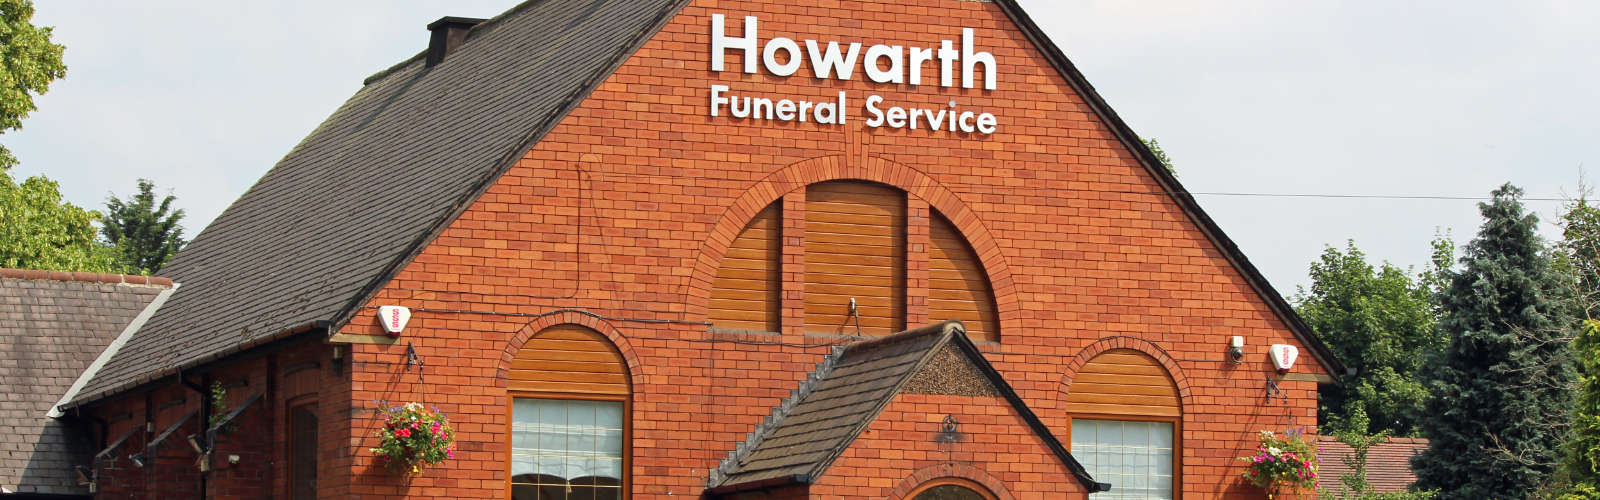 Welcome to Howarth Funeral Service